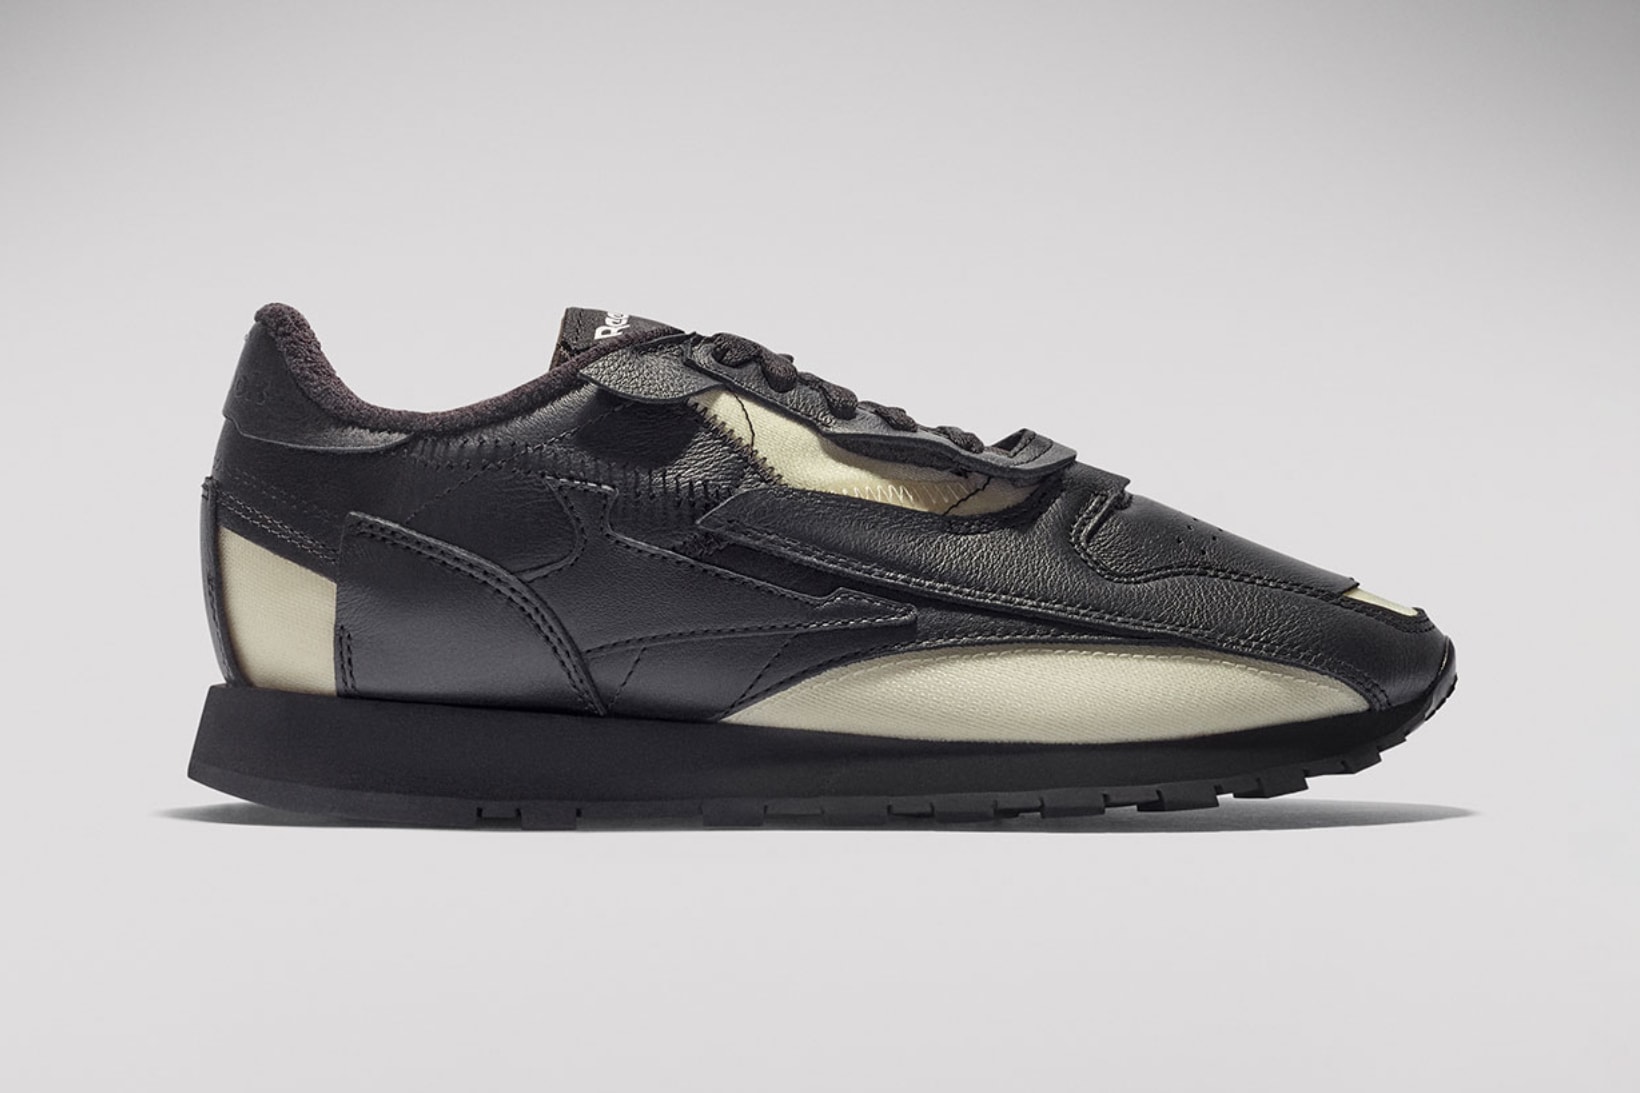 Maison Margiela x Reebok Classic Leather and Club C “Memory Of” V2 Release 